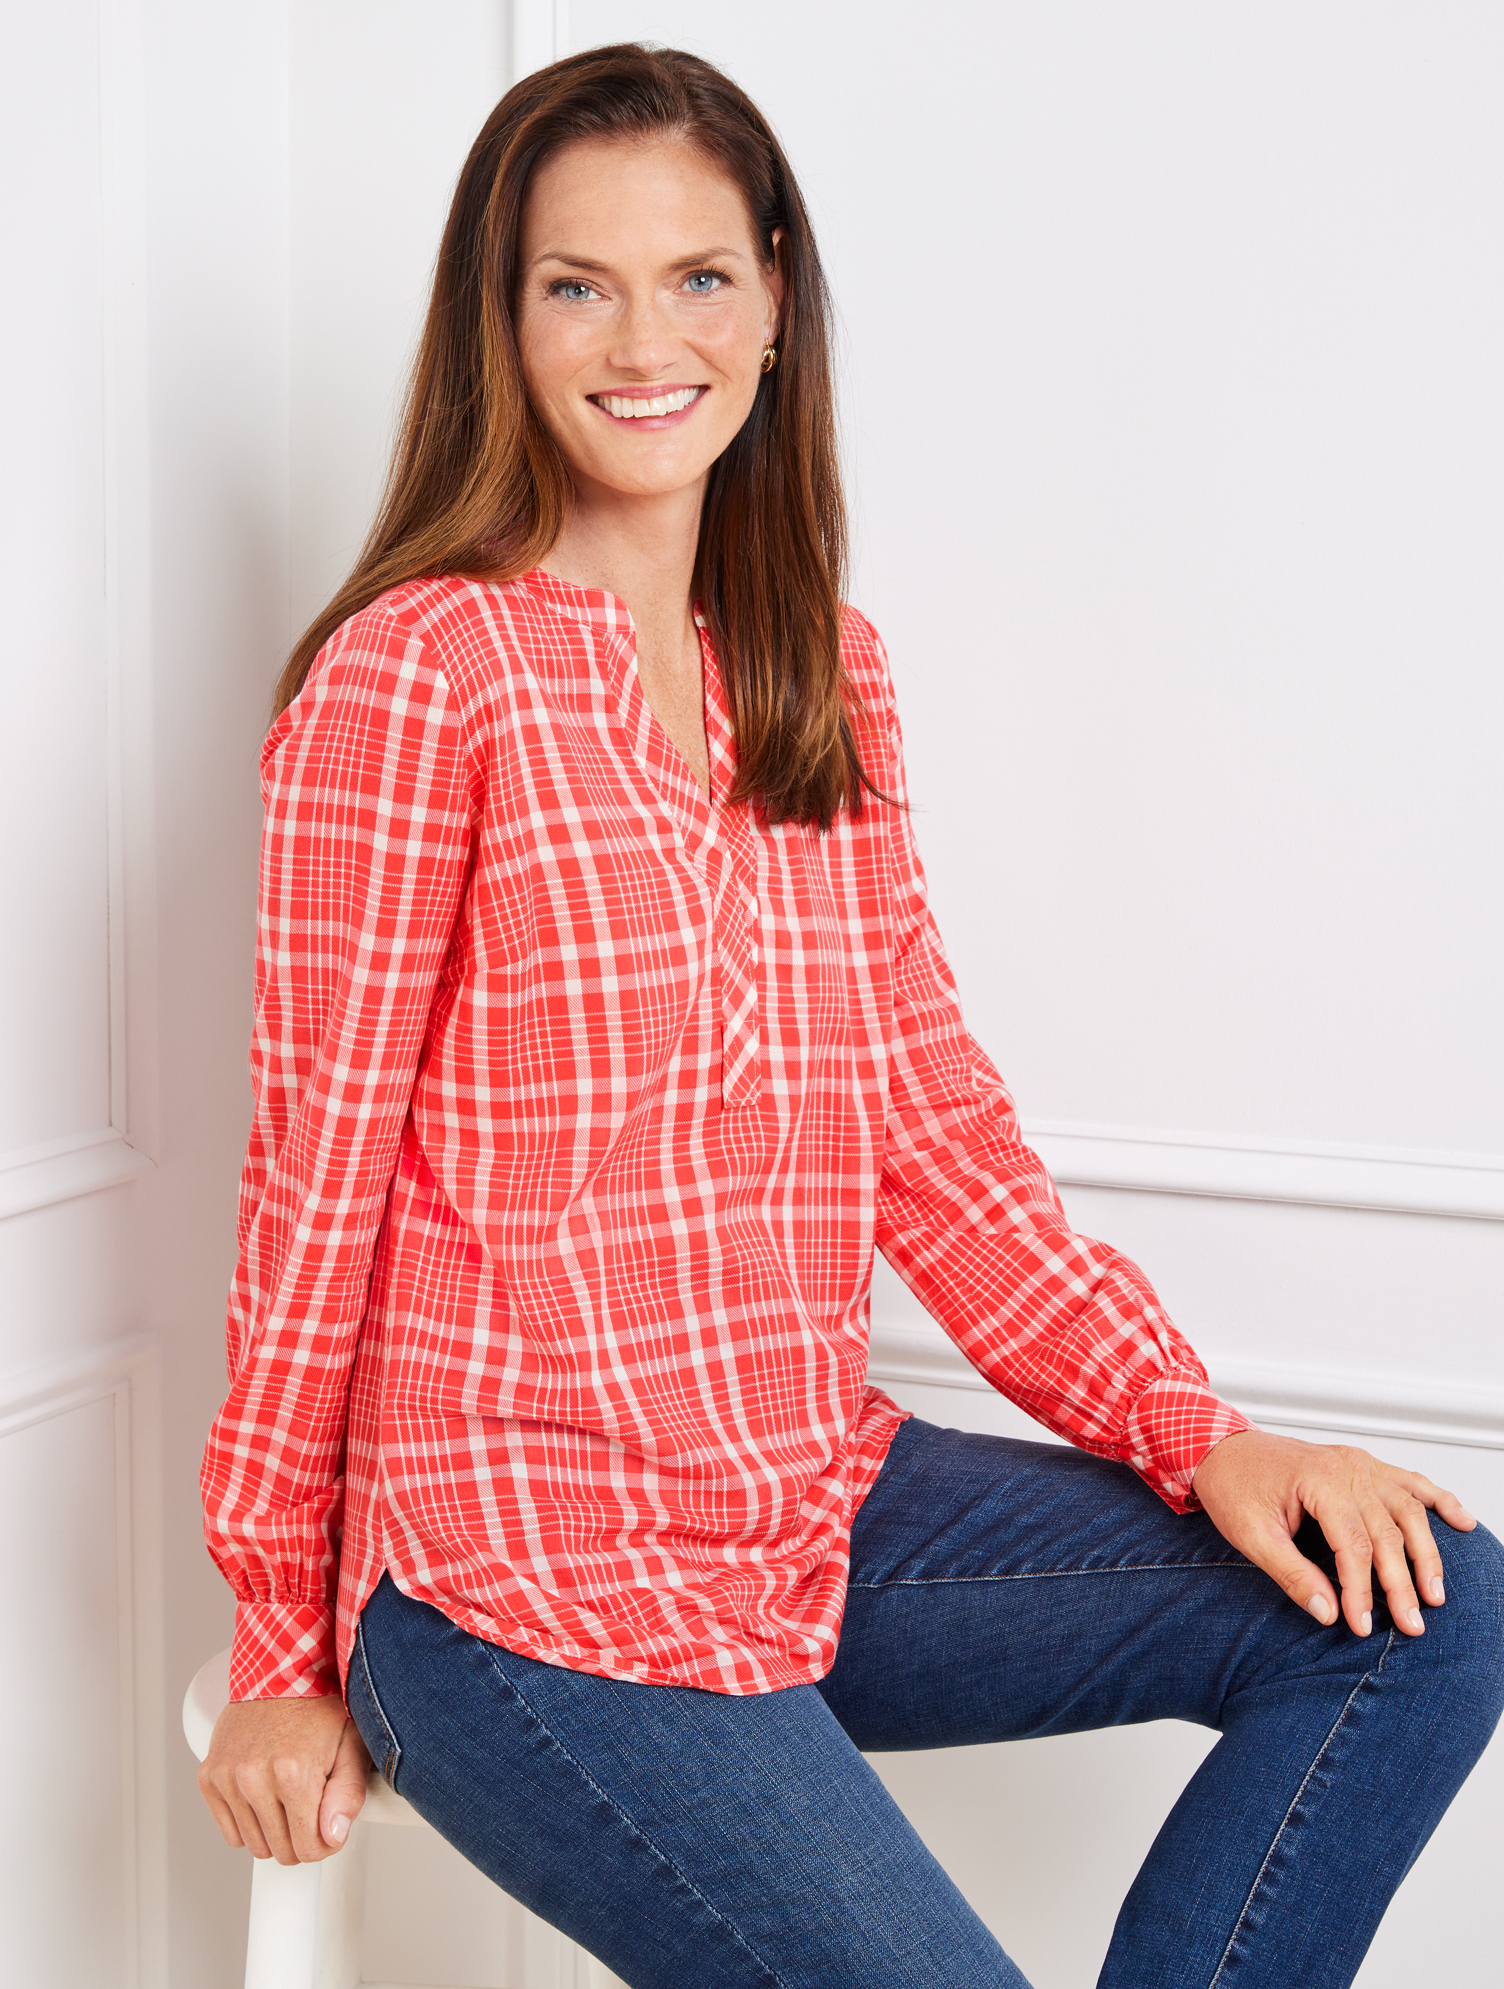 Talbots Band Collar Tunic Top - Jolly Plaid - Ivory/cayenne - Xs  In Ivory,cayenne